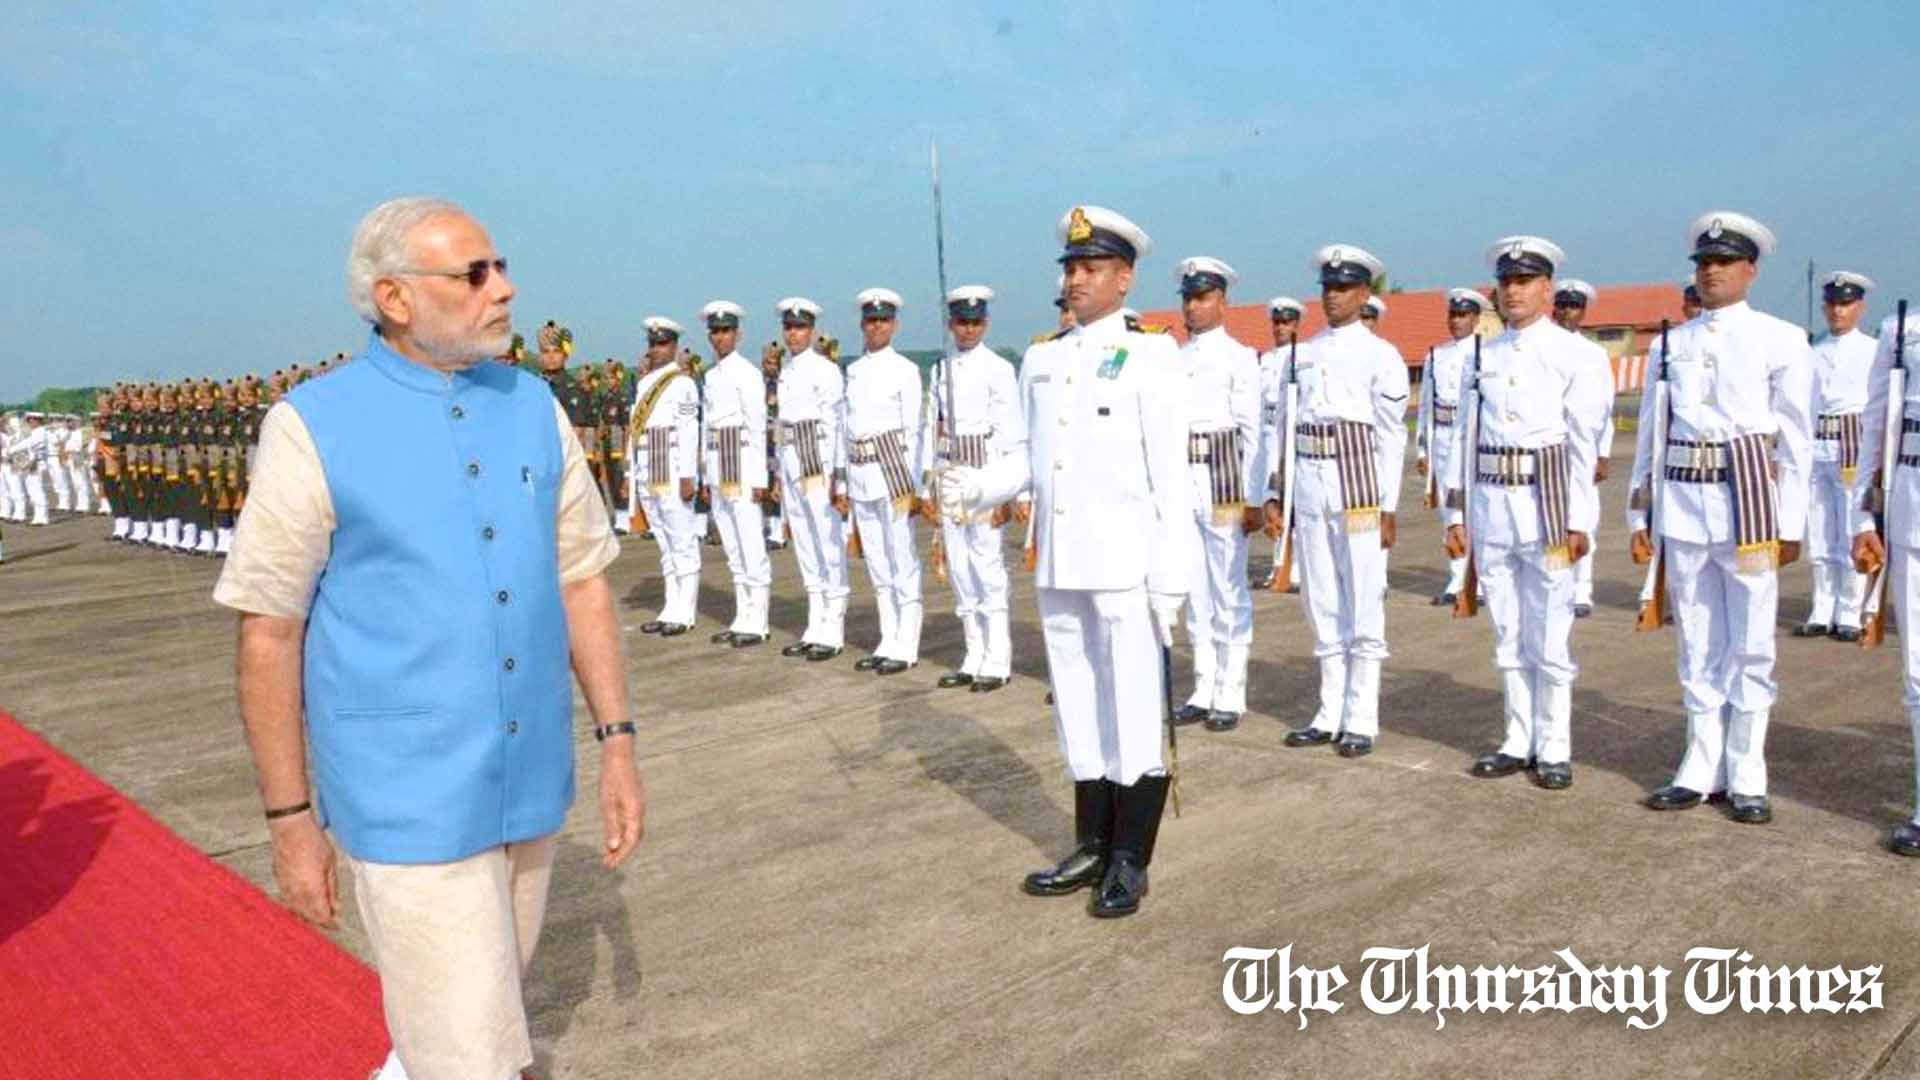 A file photo is shown of Indian Prime Minister Narendra Modi commemorating Navy Day in 2017.